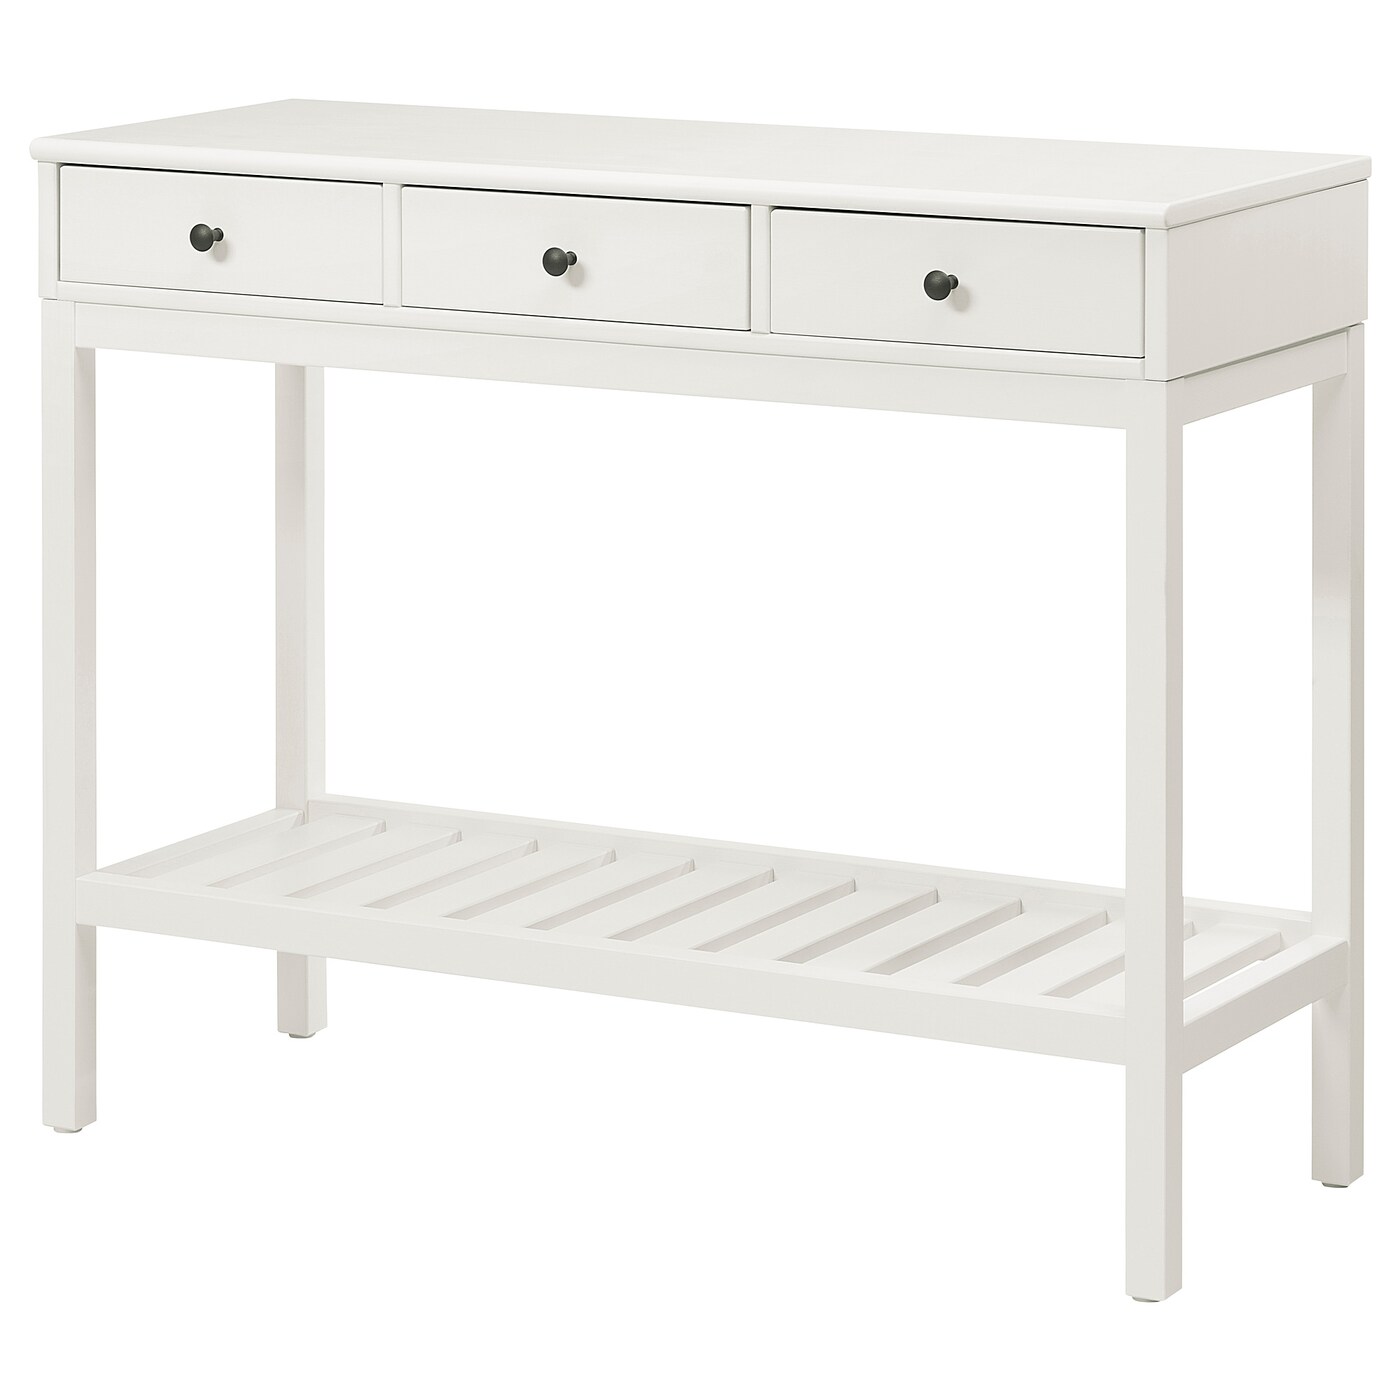 panget console table white 0836608 pe778550 s5